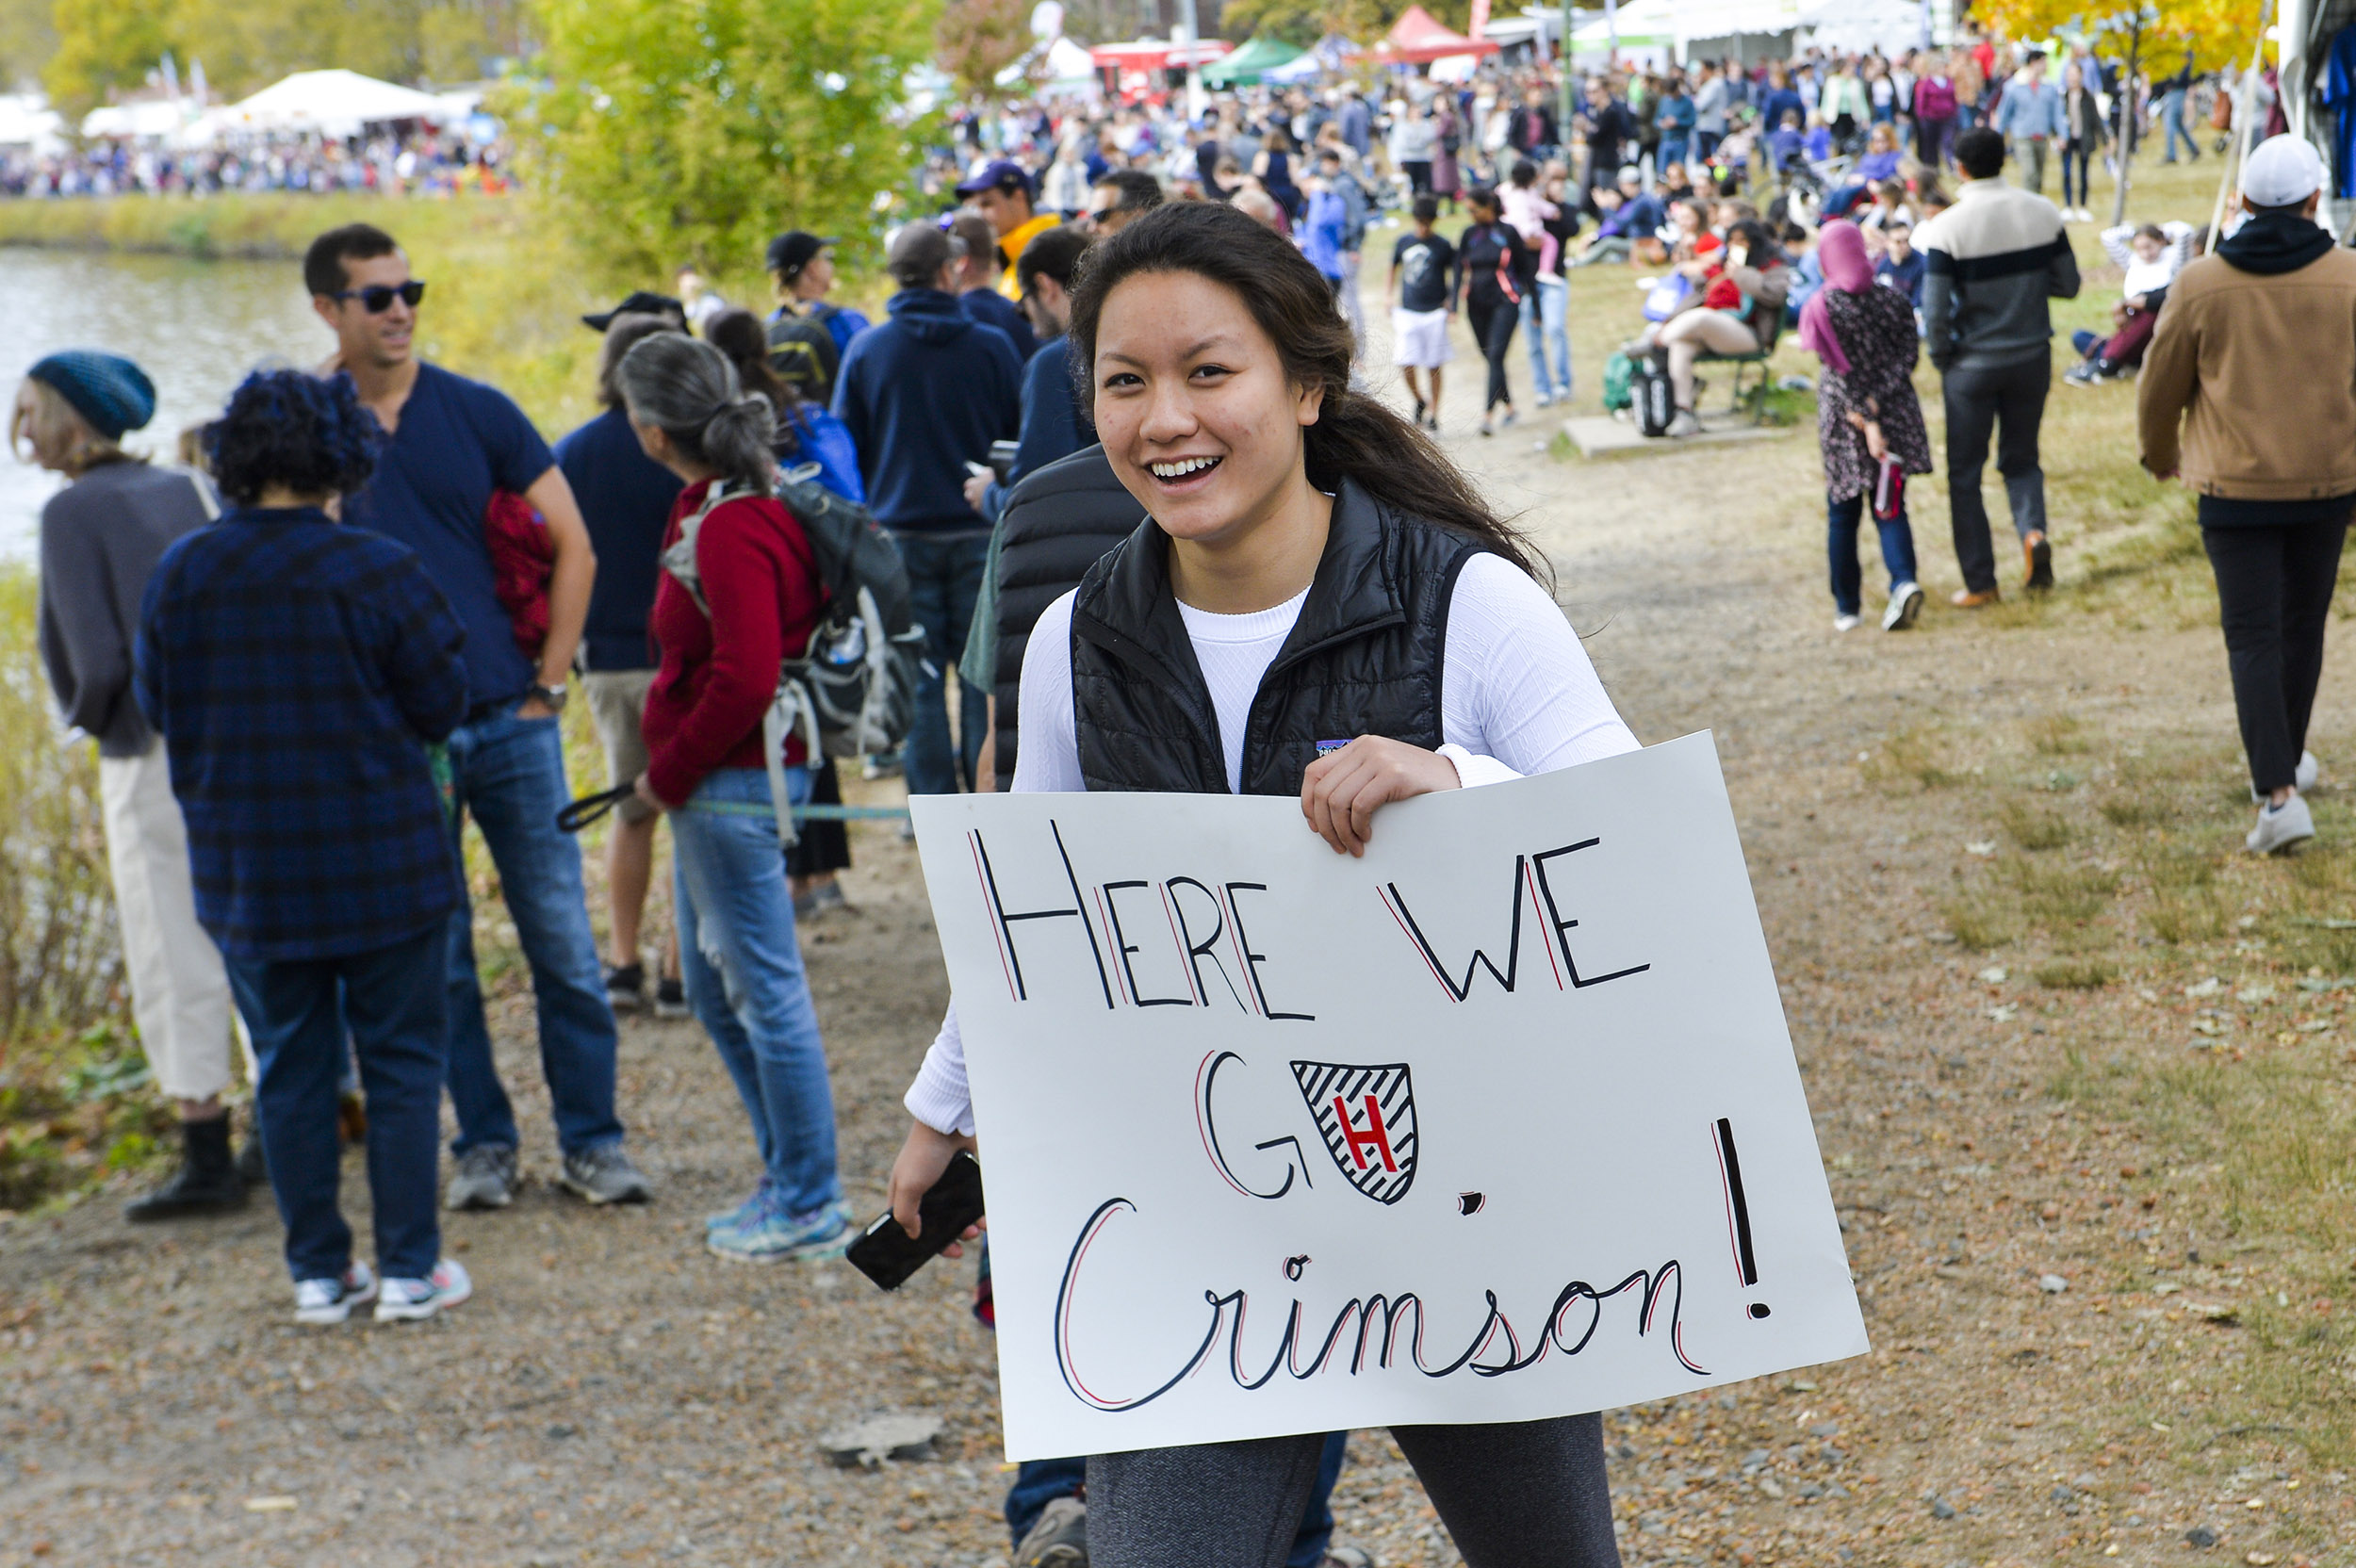 Student Athena Ye holds a sign "Here we go Crimson" during Head of the Charles weekend.